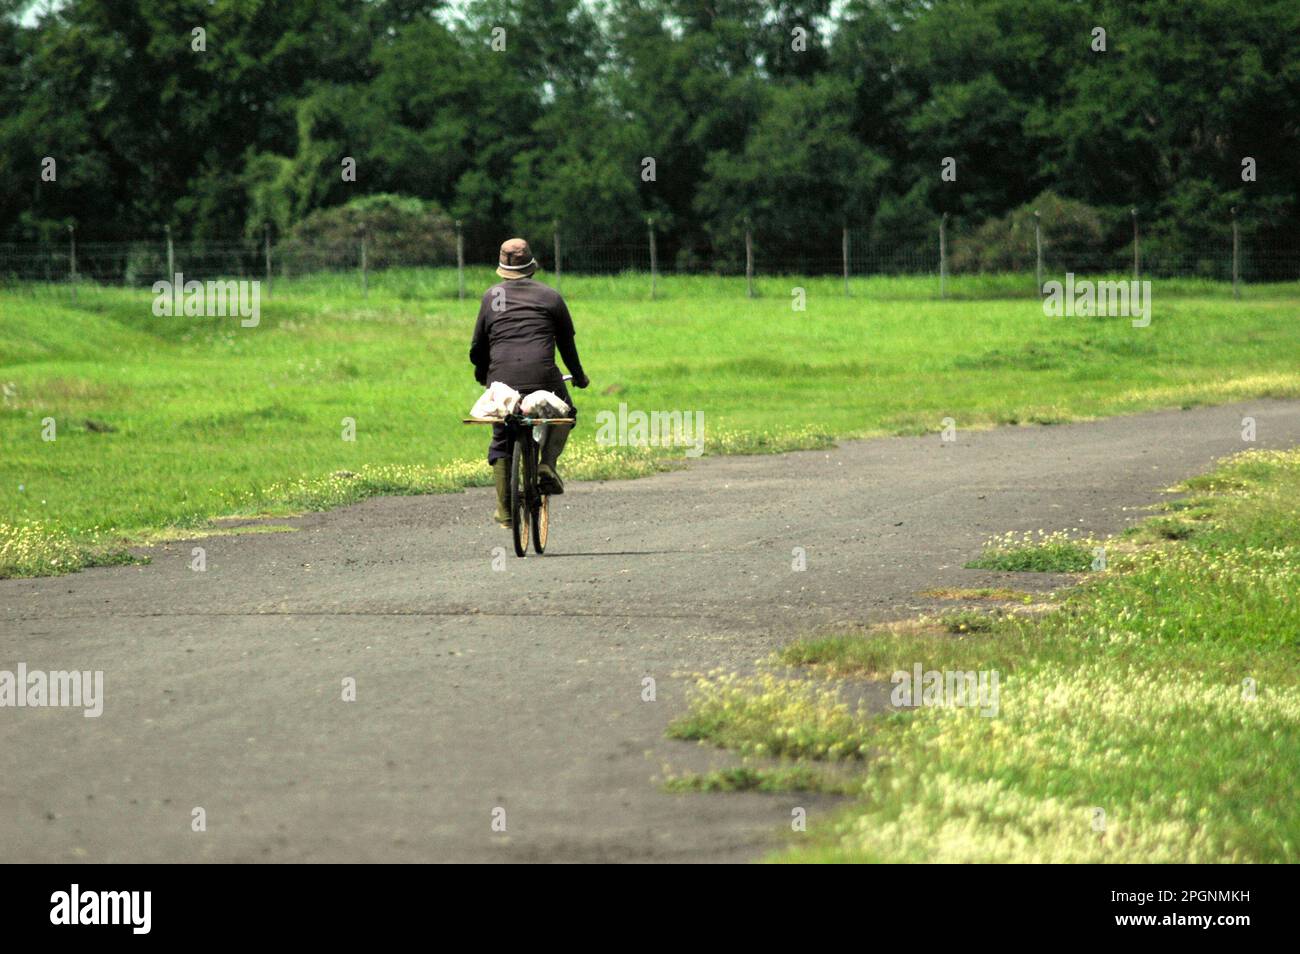 A man is riding his bicycle on a road in the buffer zone of Jakarta International Soekarno-Hatta Airport in Rawa Bokor, Tangerang, Banten, Indonesia. The buffer zone of Jakarta's Soekarno-Hatta International Airport, which consists of wetland and grassland areas neighboring the airport and human settlements, is somehow offering beautiful views. It serves ecologically as a water catchment area. As the grassland allows local community to let their goats grazing, wildlife—dominated by various waterbird species—enjoys the wetland as a transit and feeding ground. Stock Photo